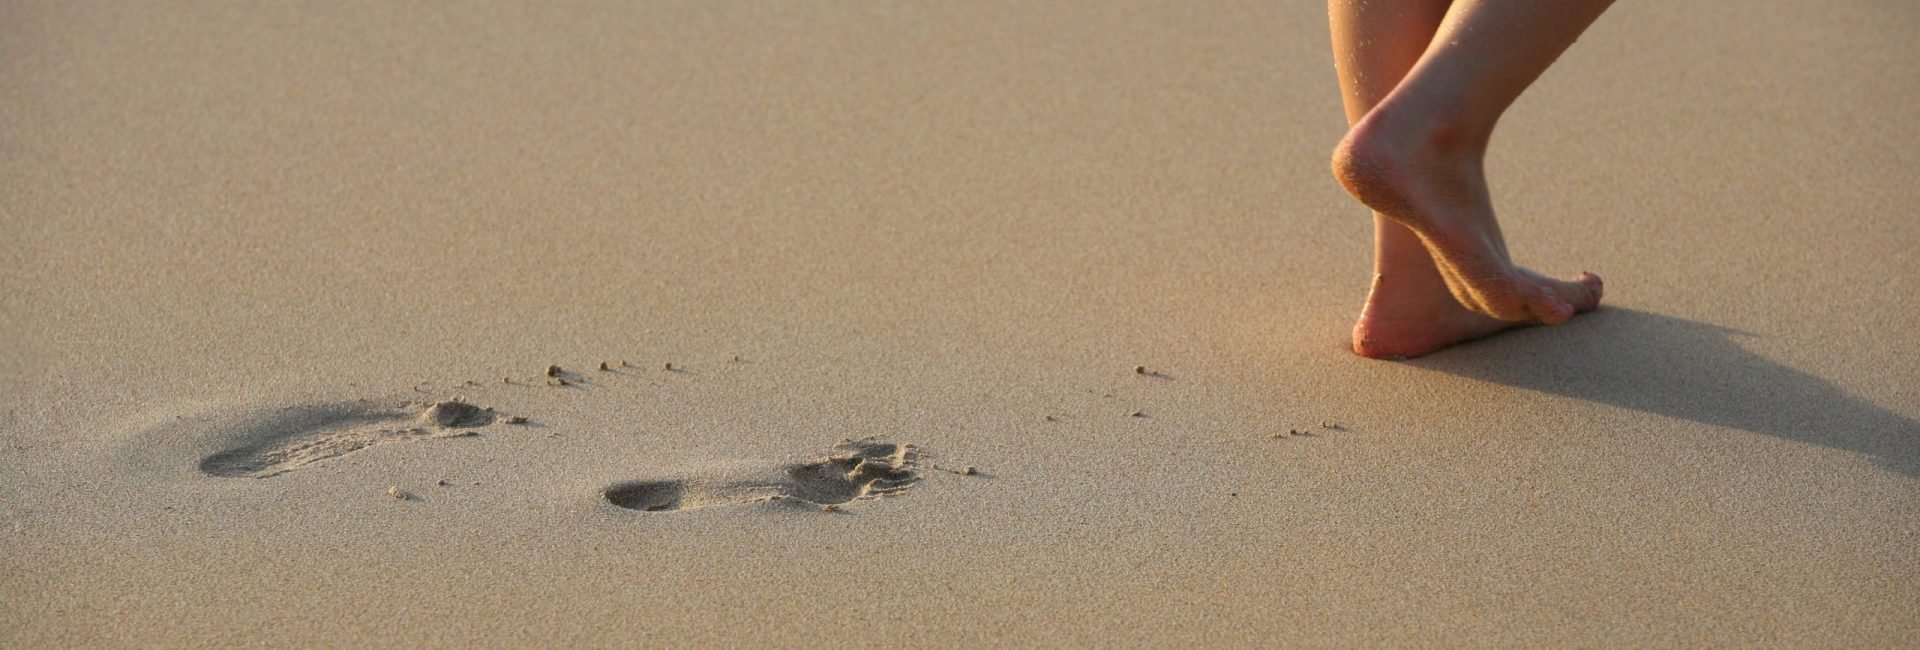 Image of foot prints and legs on beach